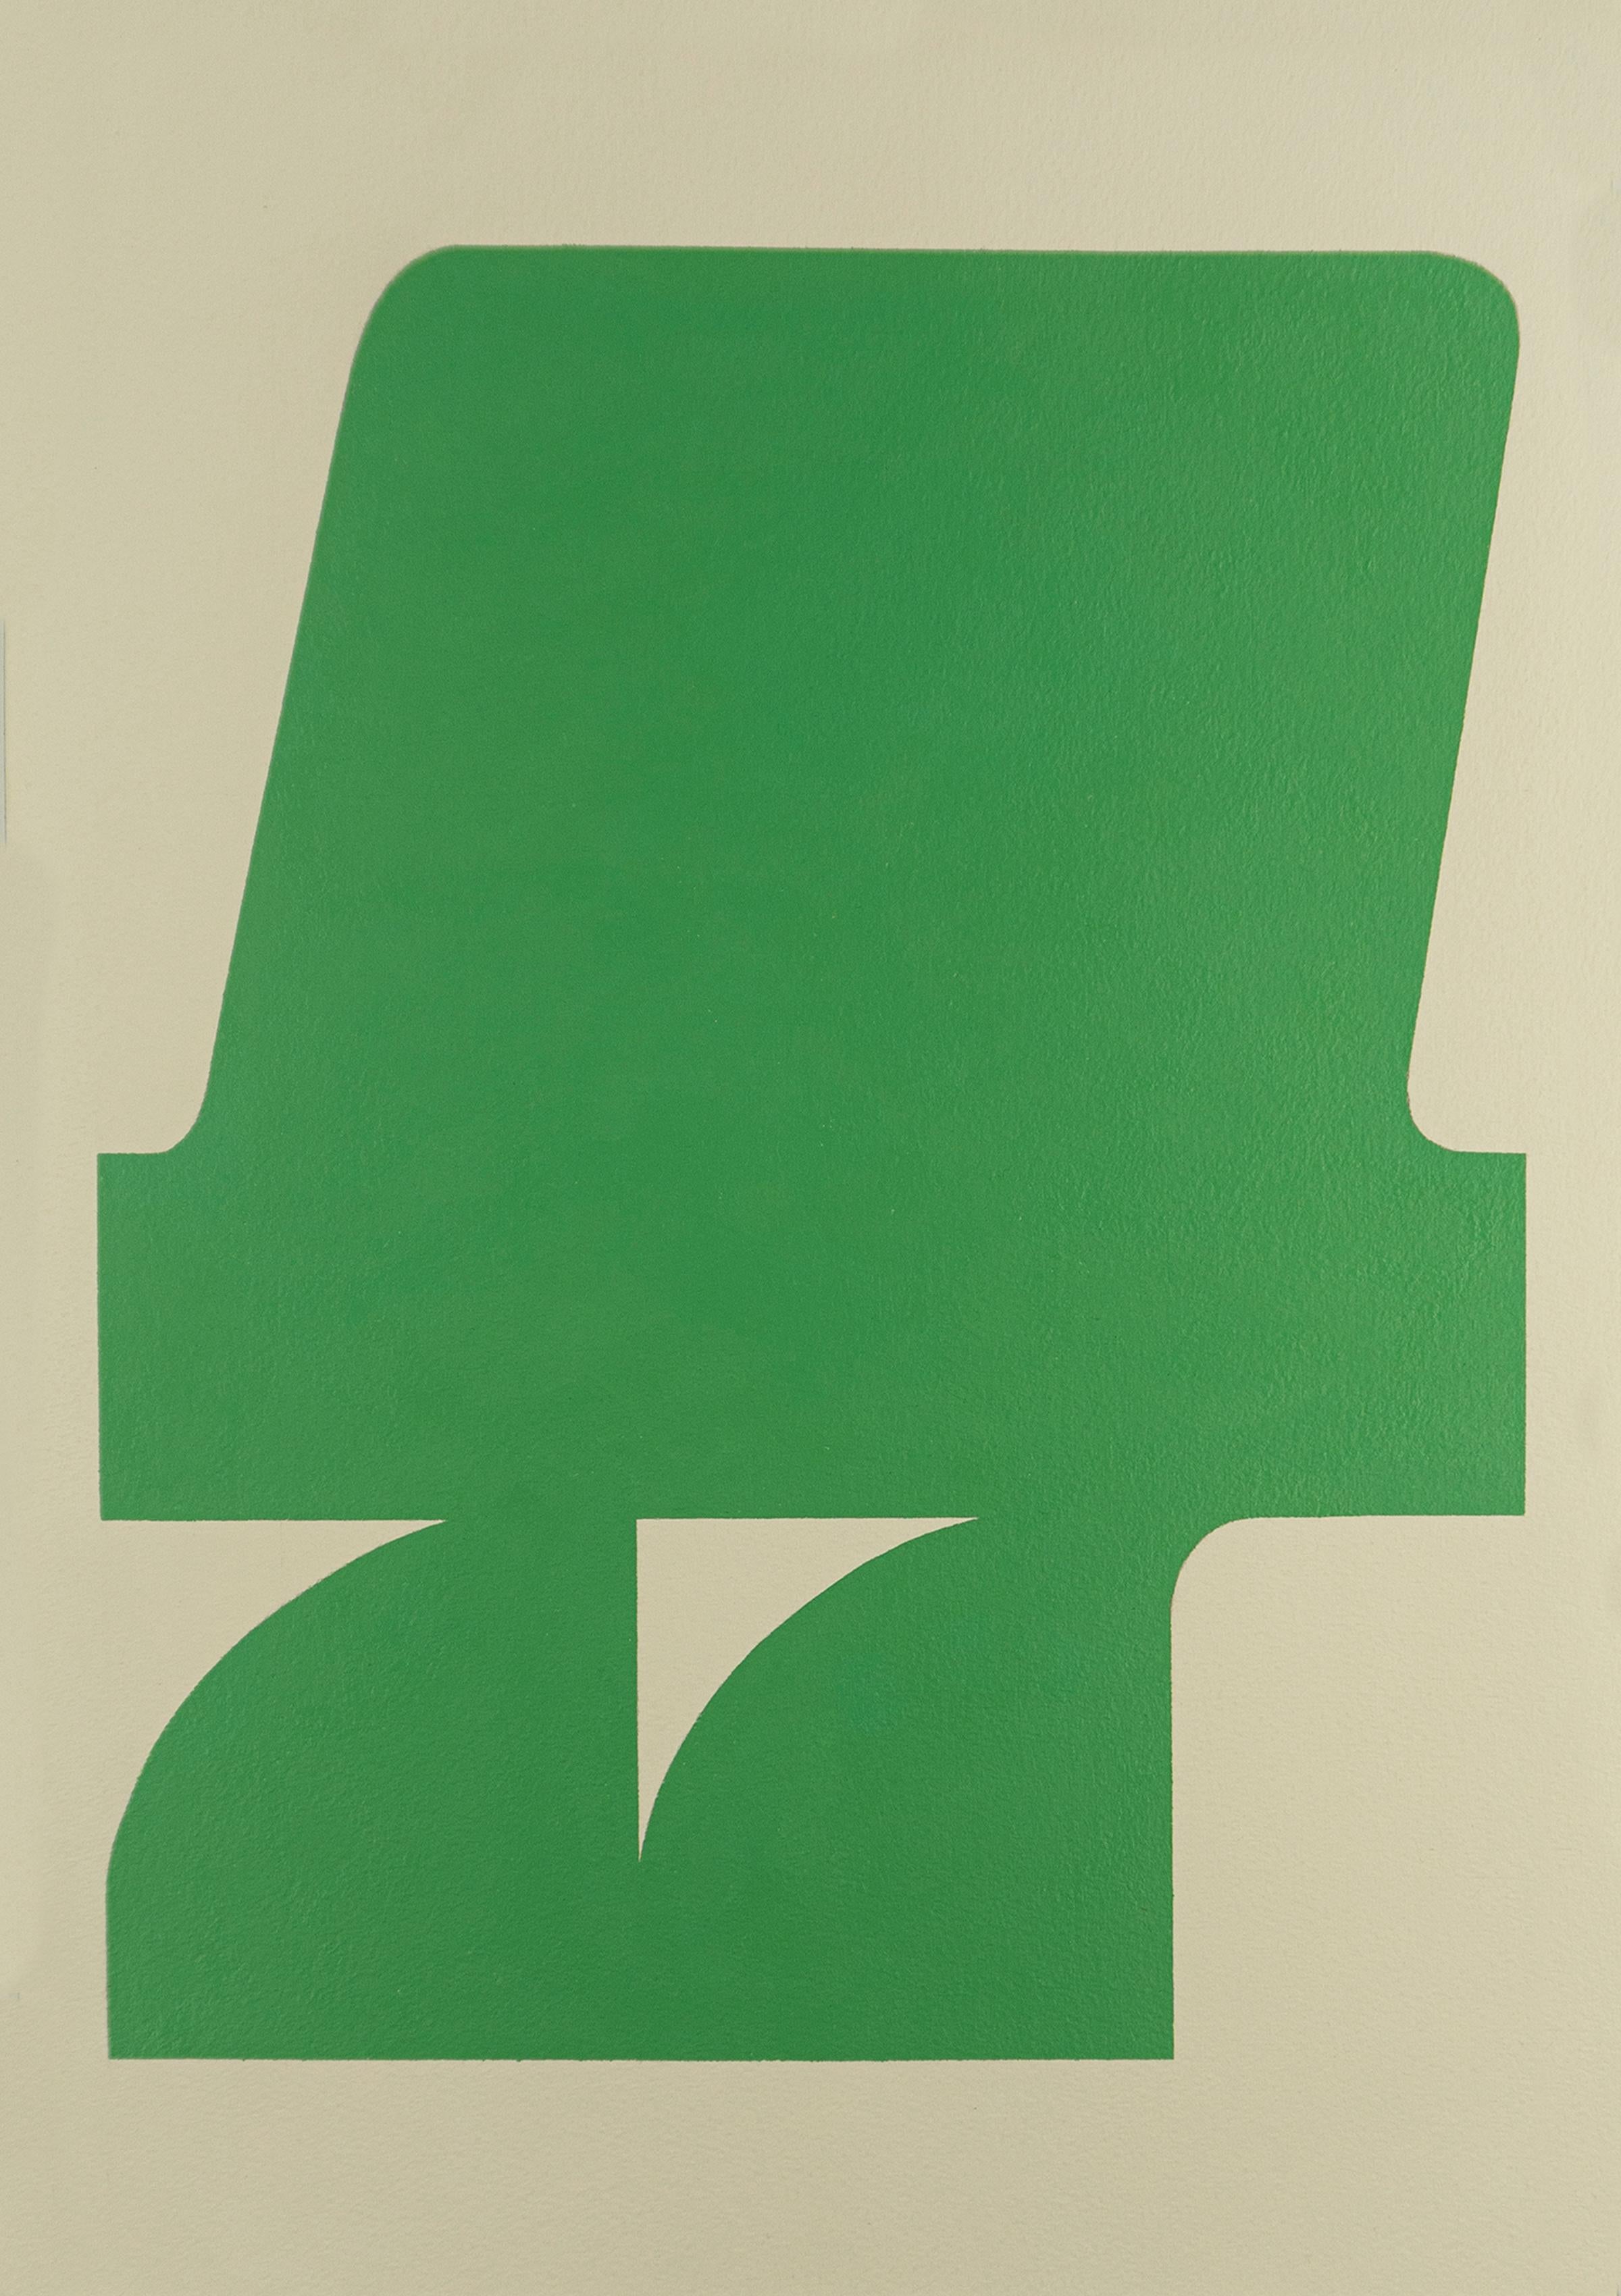 Ryan Park Abstract Drawing - Shape 12 (2019) - Abstract shape, minimalist gestural, green & white on paper